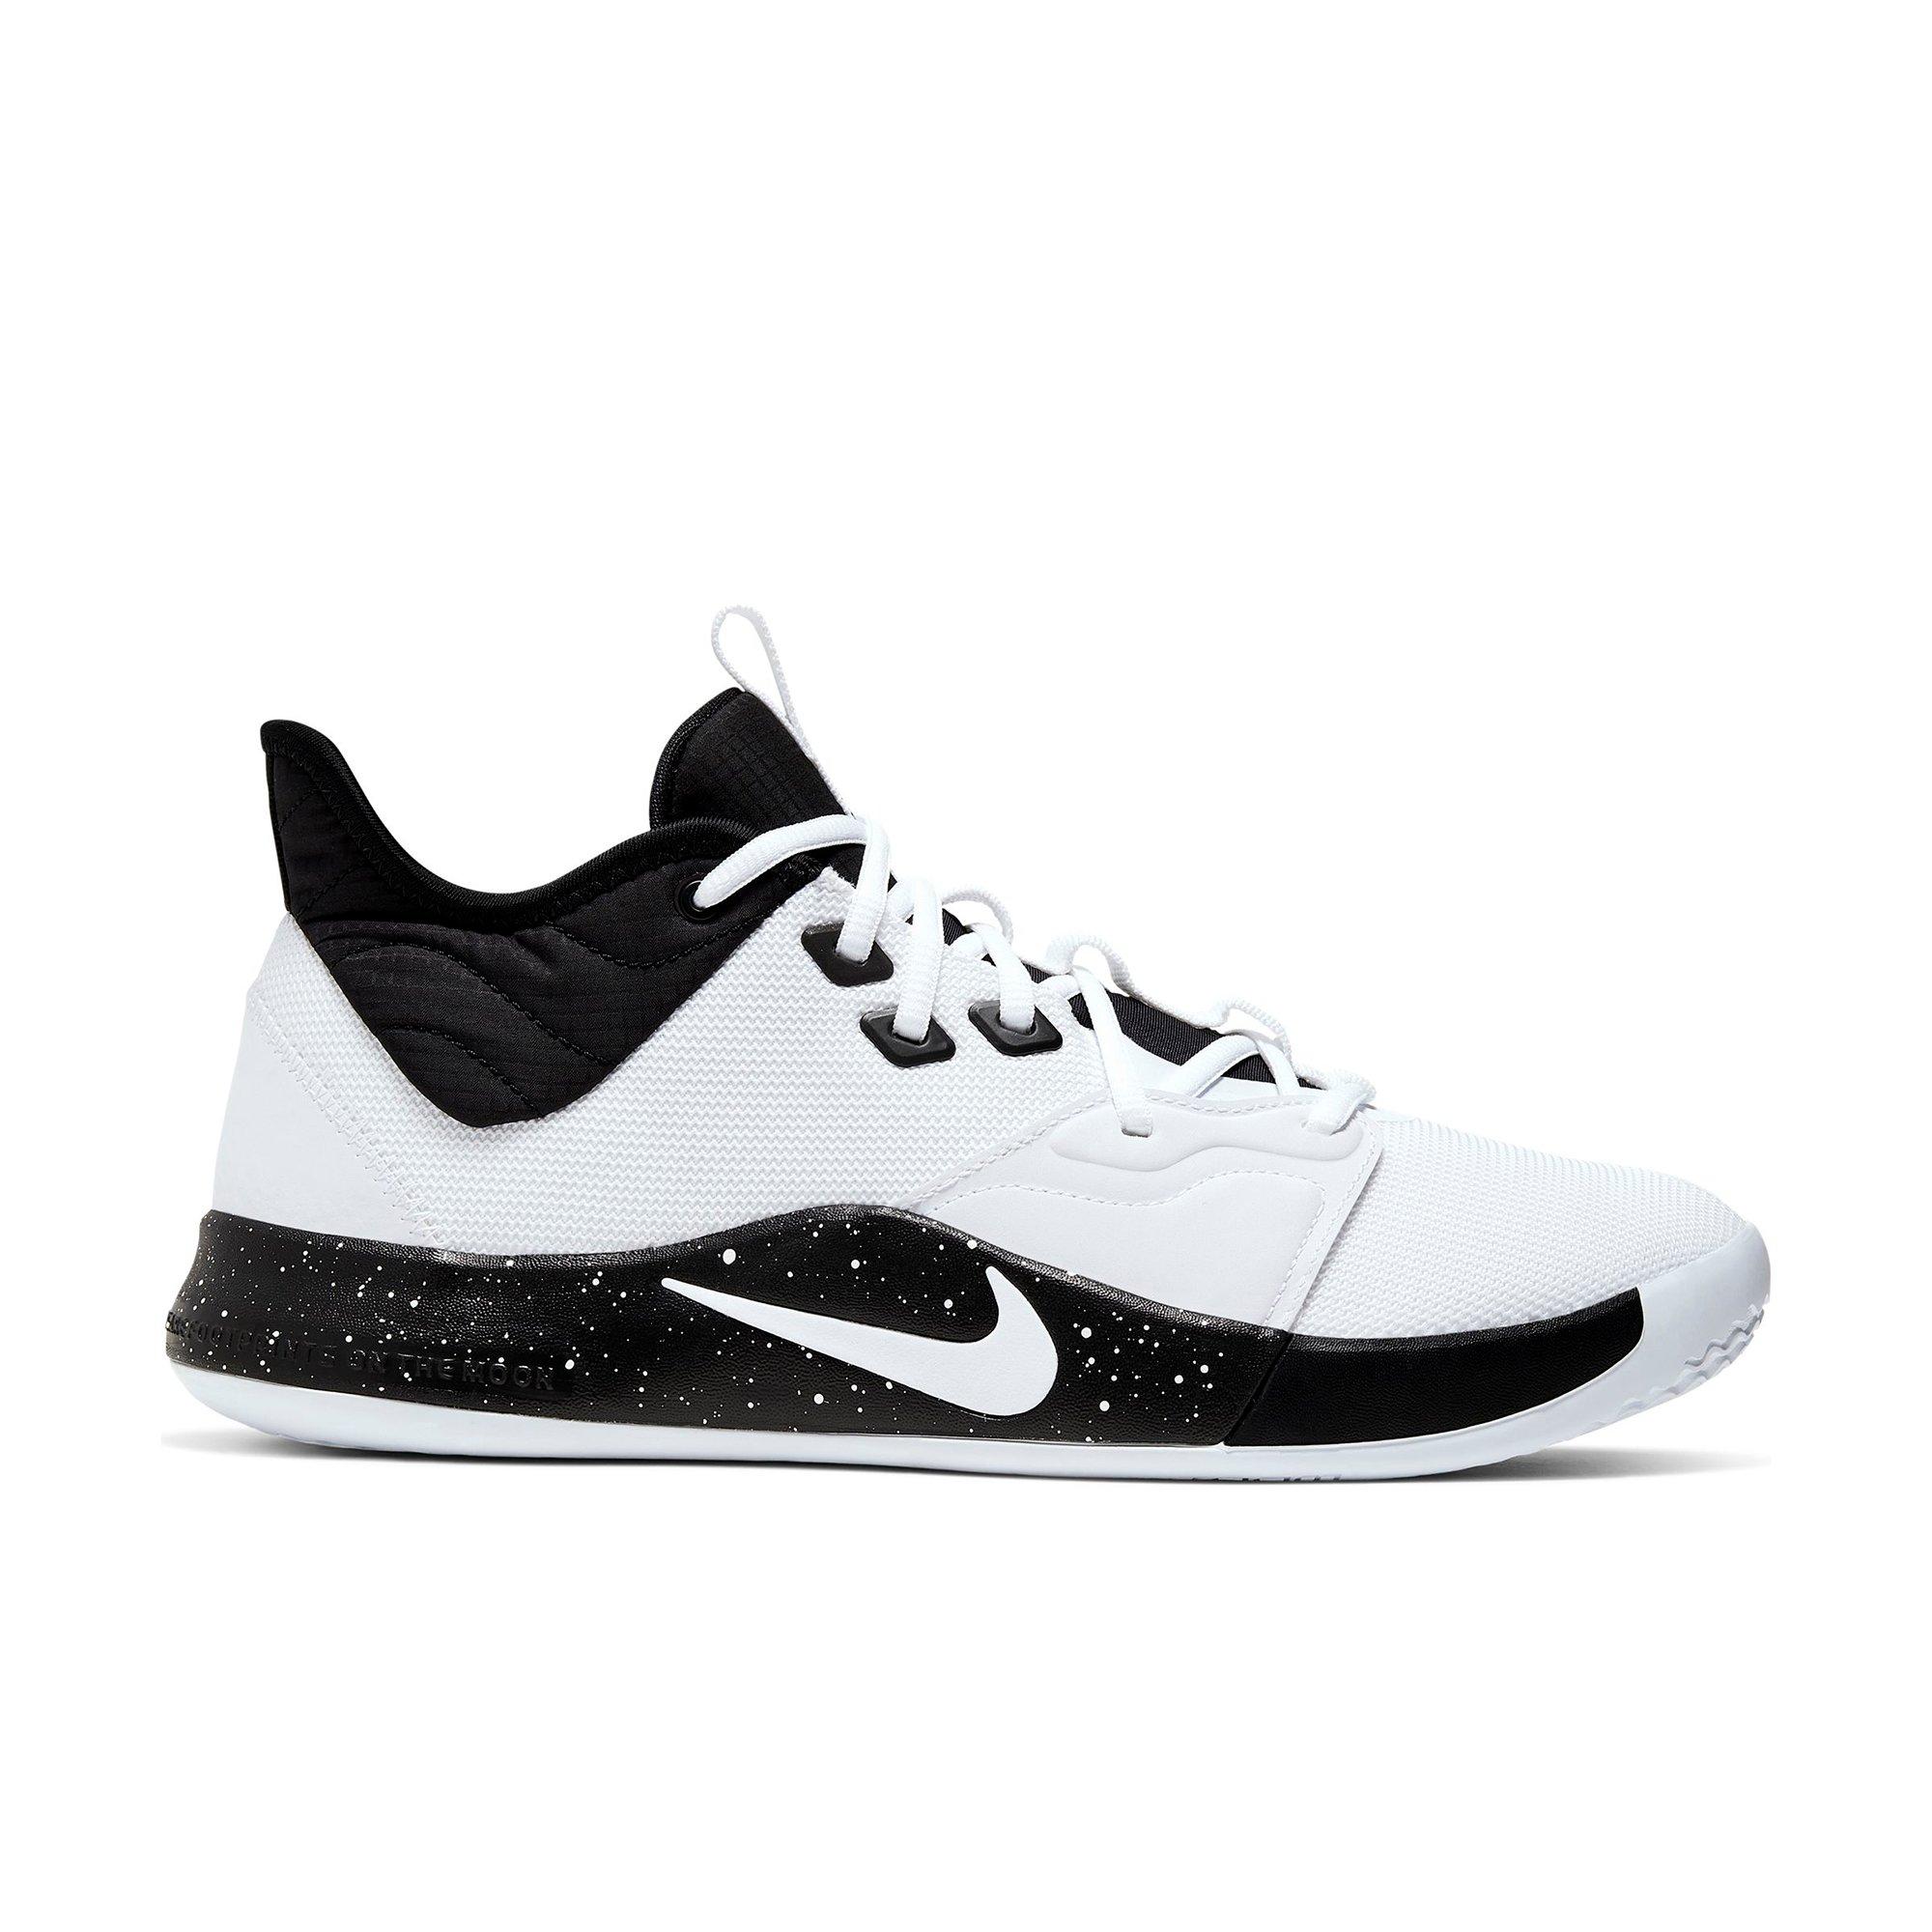 paul george basketball shoes white